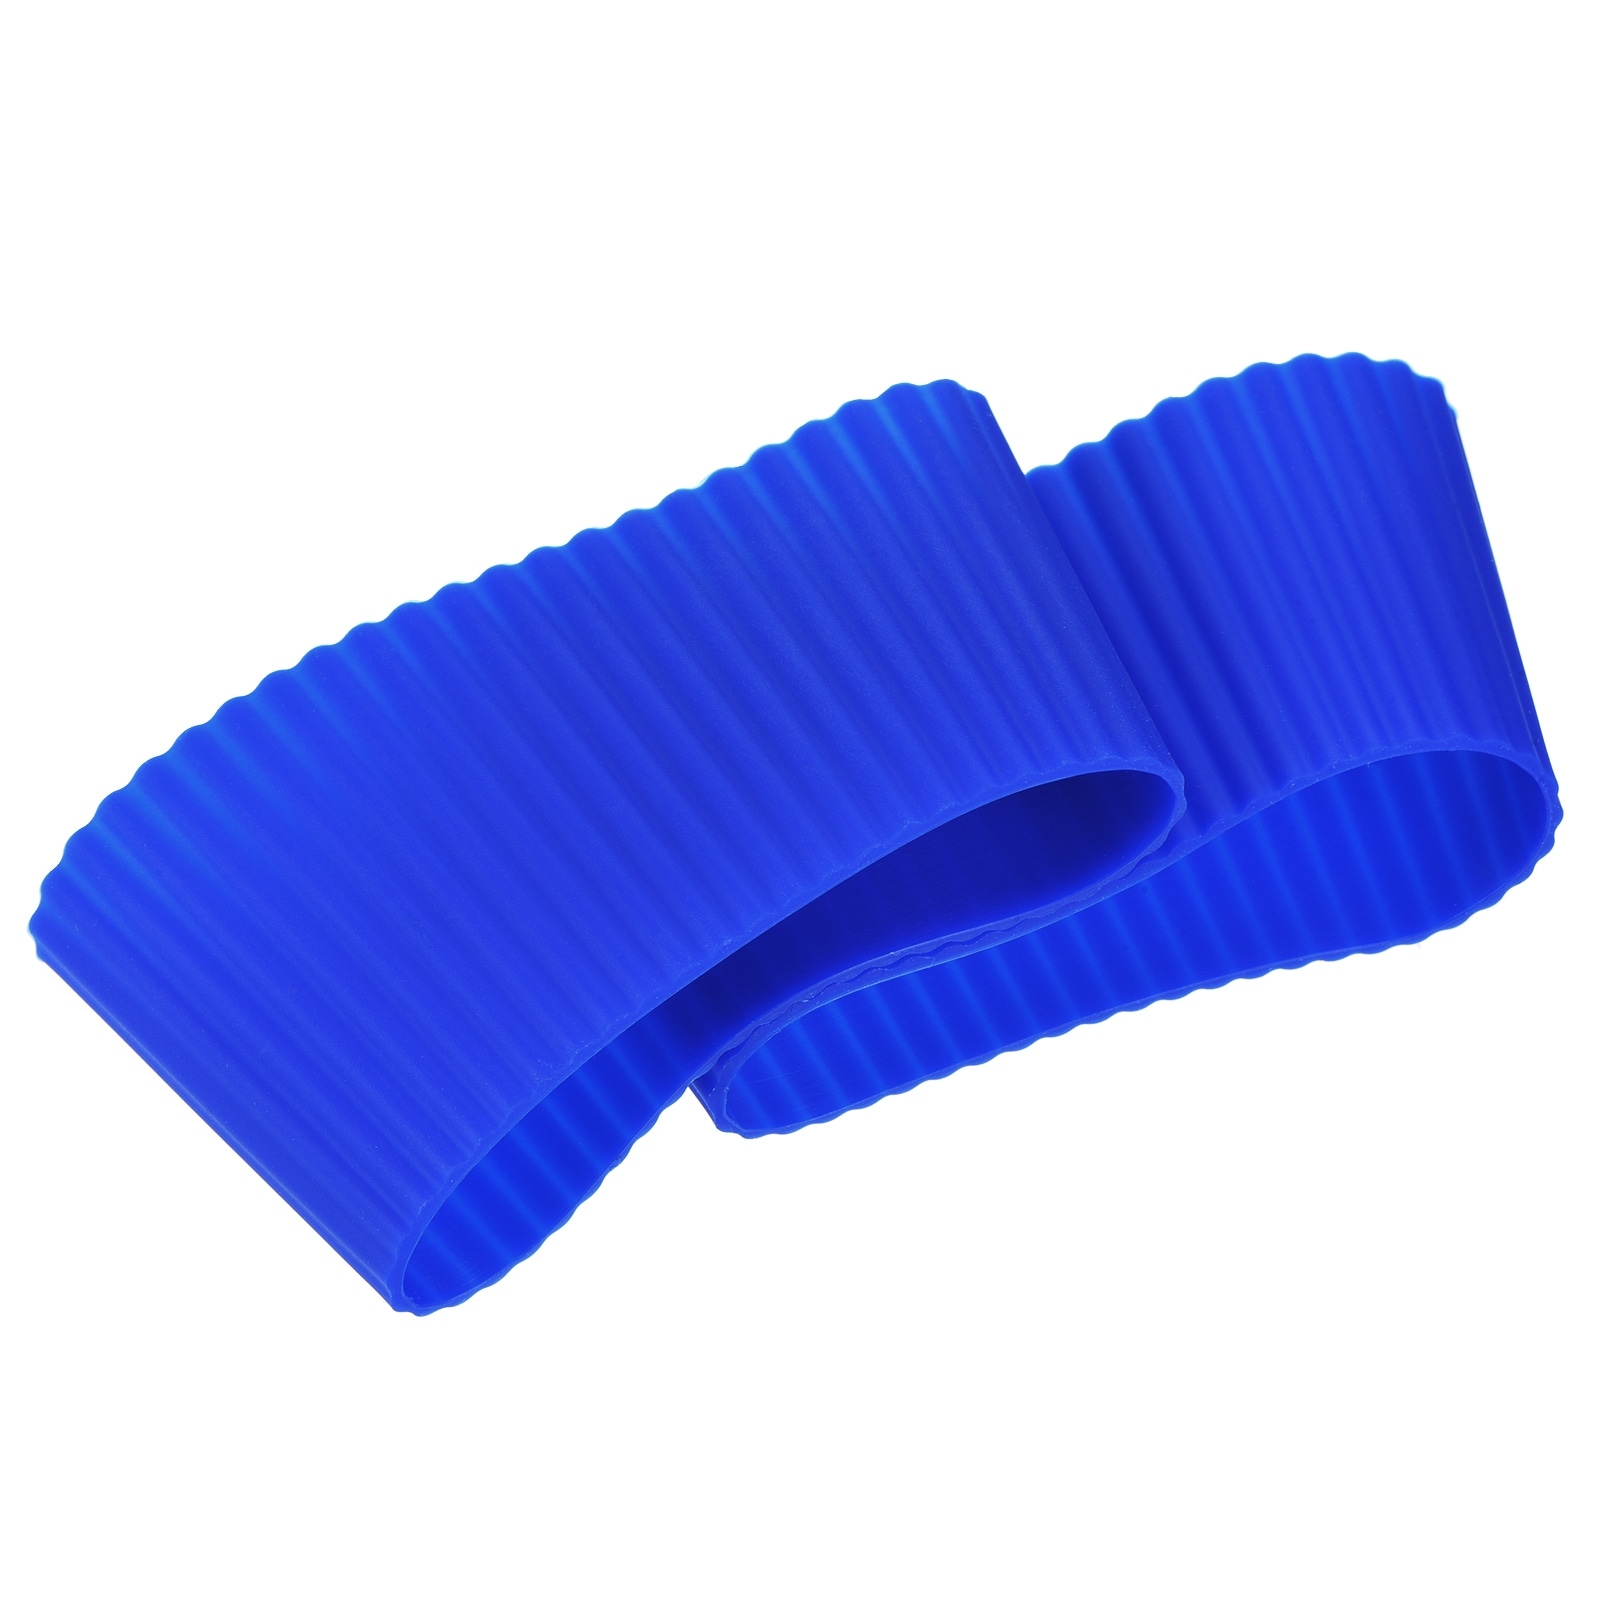 https://ak1.ostkcdn.com/images/products/is/images/direct/8b3933e6605880c4fb68d7b285e88bfeedfd79c4/Heat-Resistant-Protective-Anti-slip-Cup-Silicone-Covers-Water-Bottle-Boots.jpg